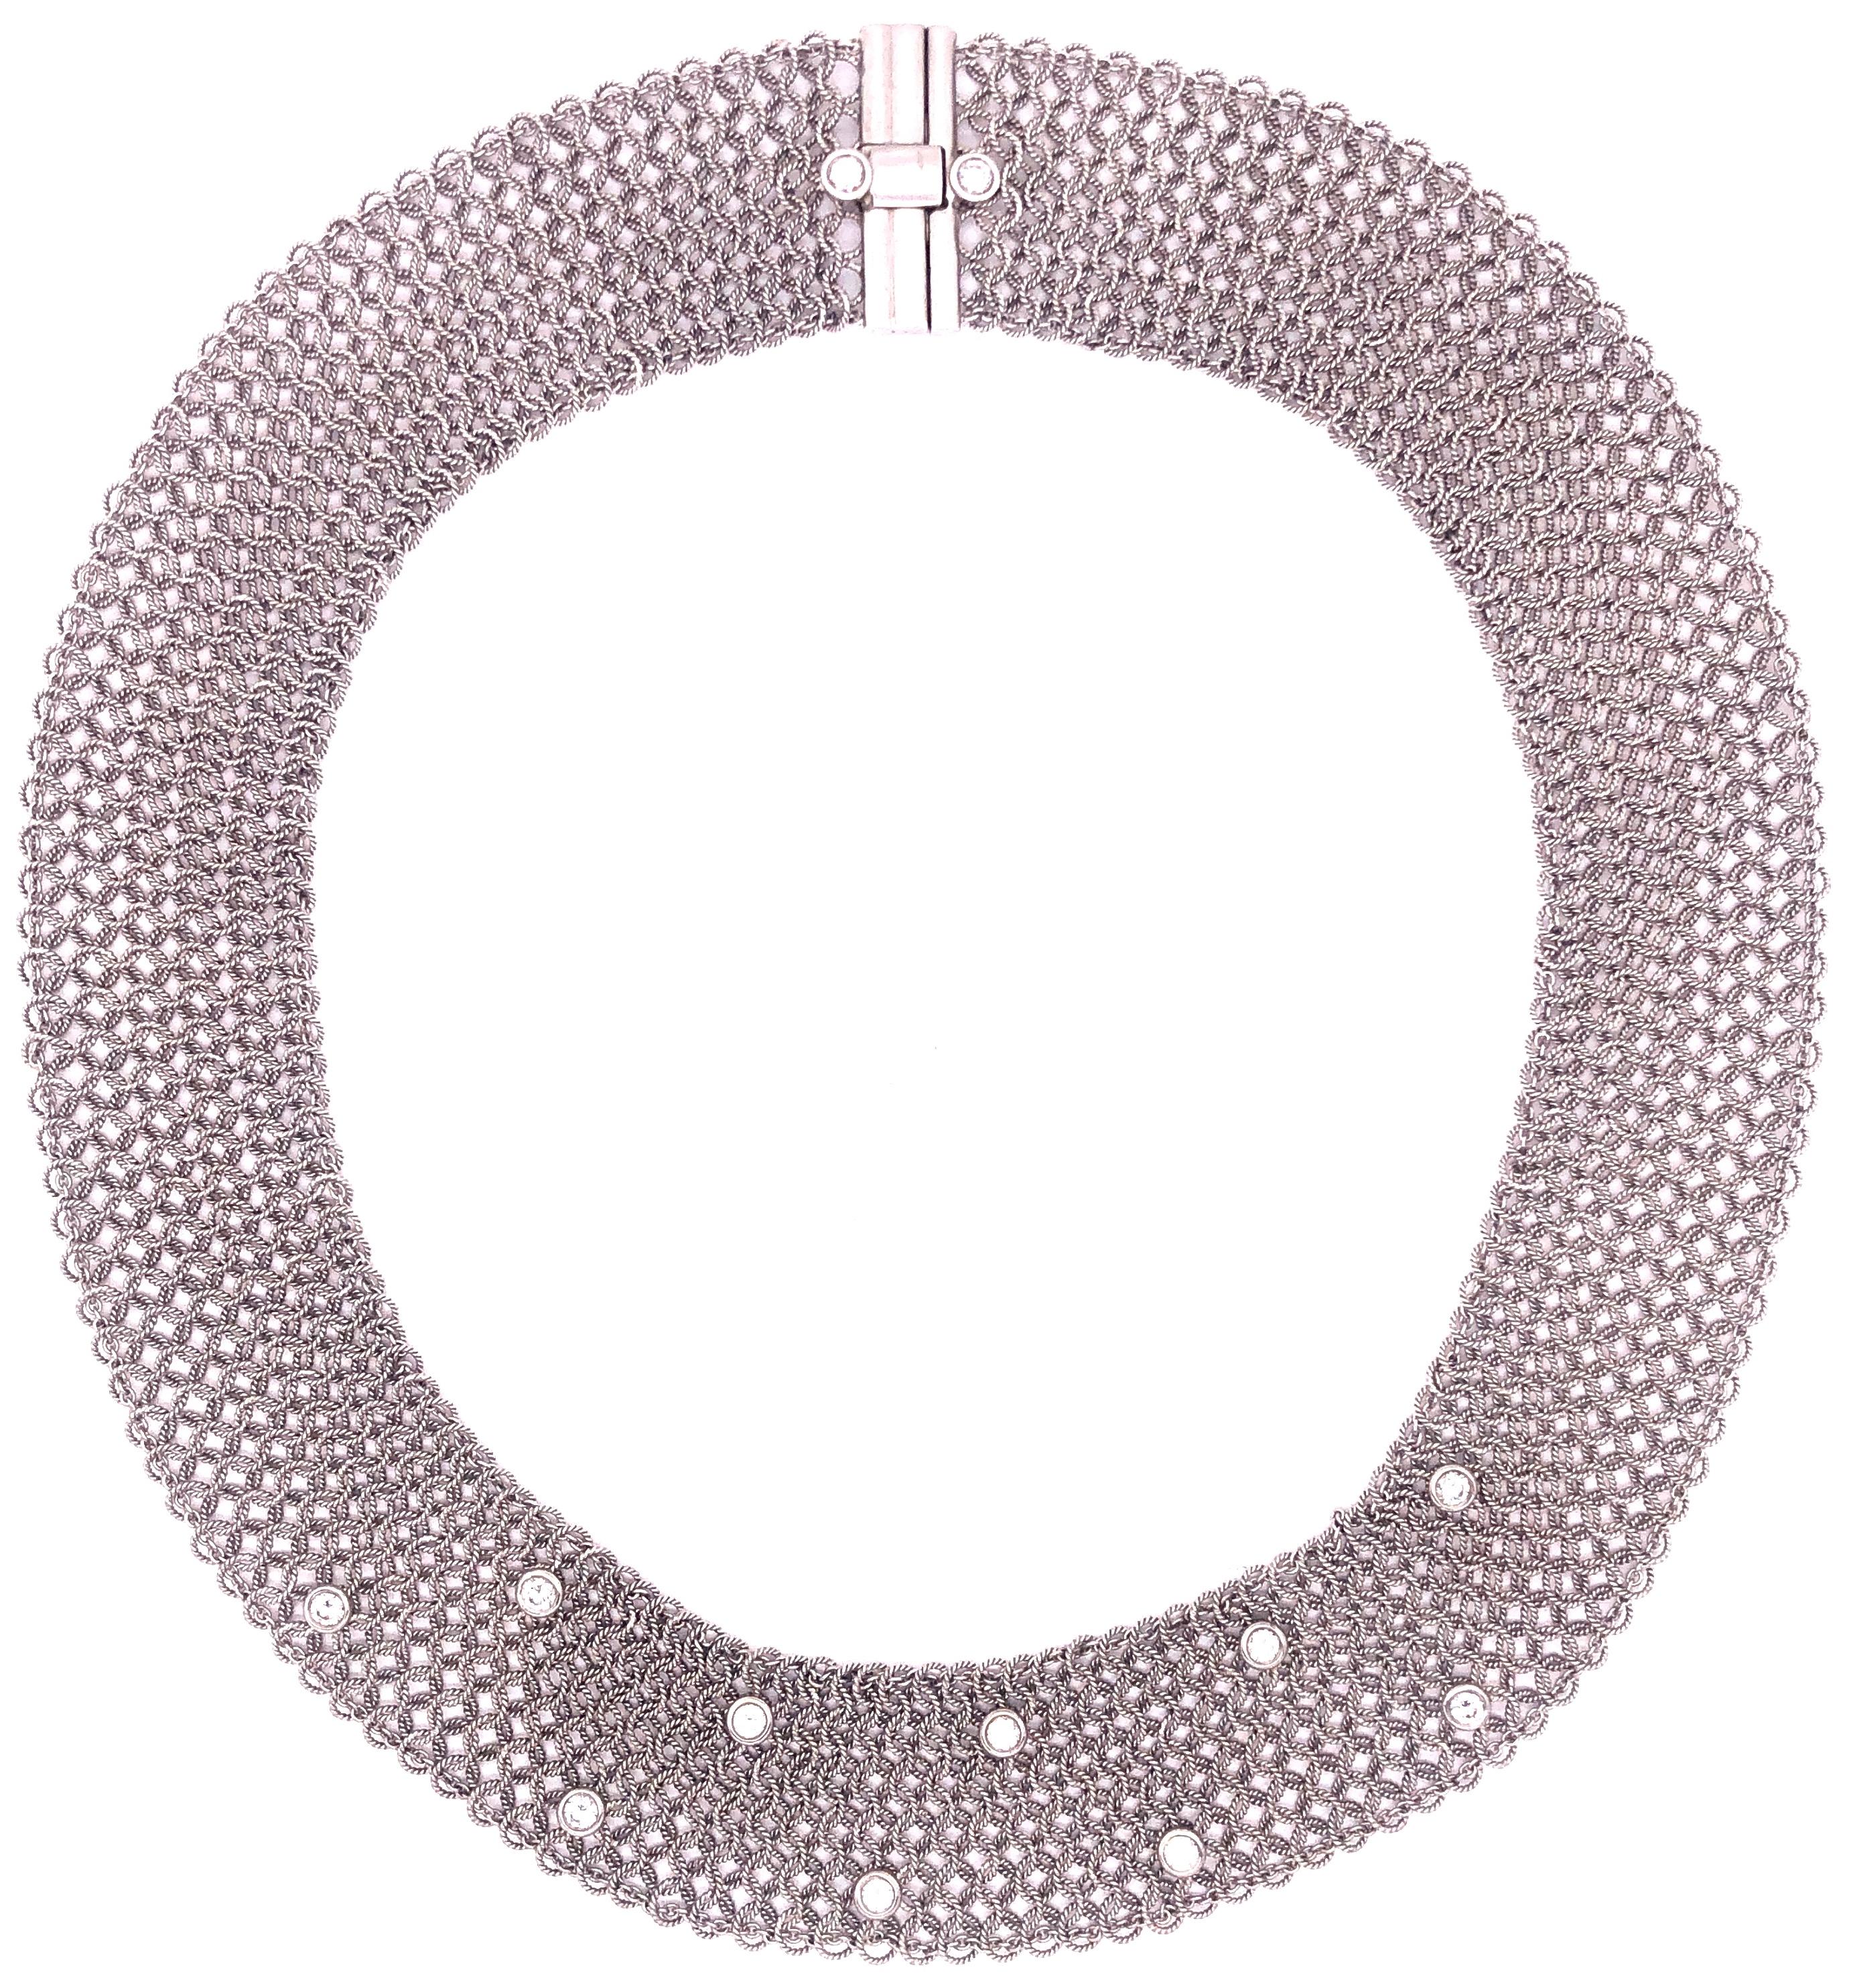 Estate Mesh Link and Diamond Necklace Italian 18 Karat White Gold having a center of ten and a squeeze lock with two .8 round diamonds. .96 carat of round diamonds total. The whole weighing 67.4 grams. Comes with a matching ring sold separately.